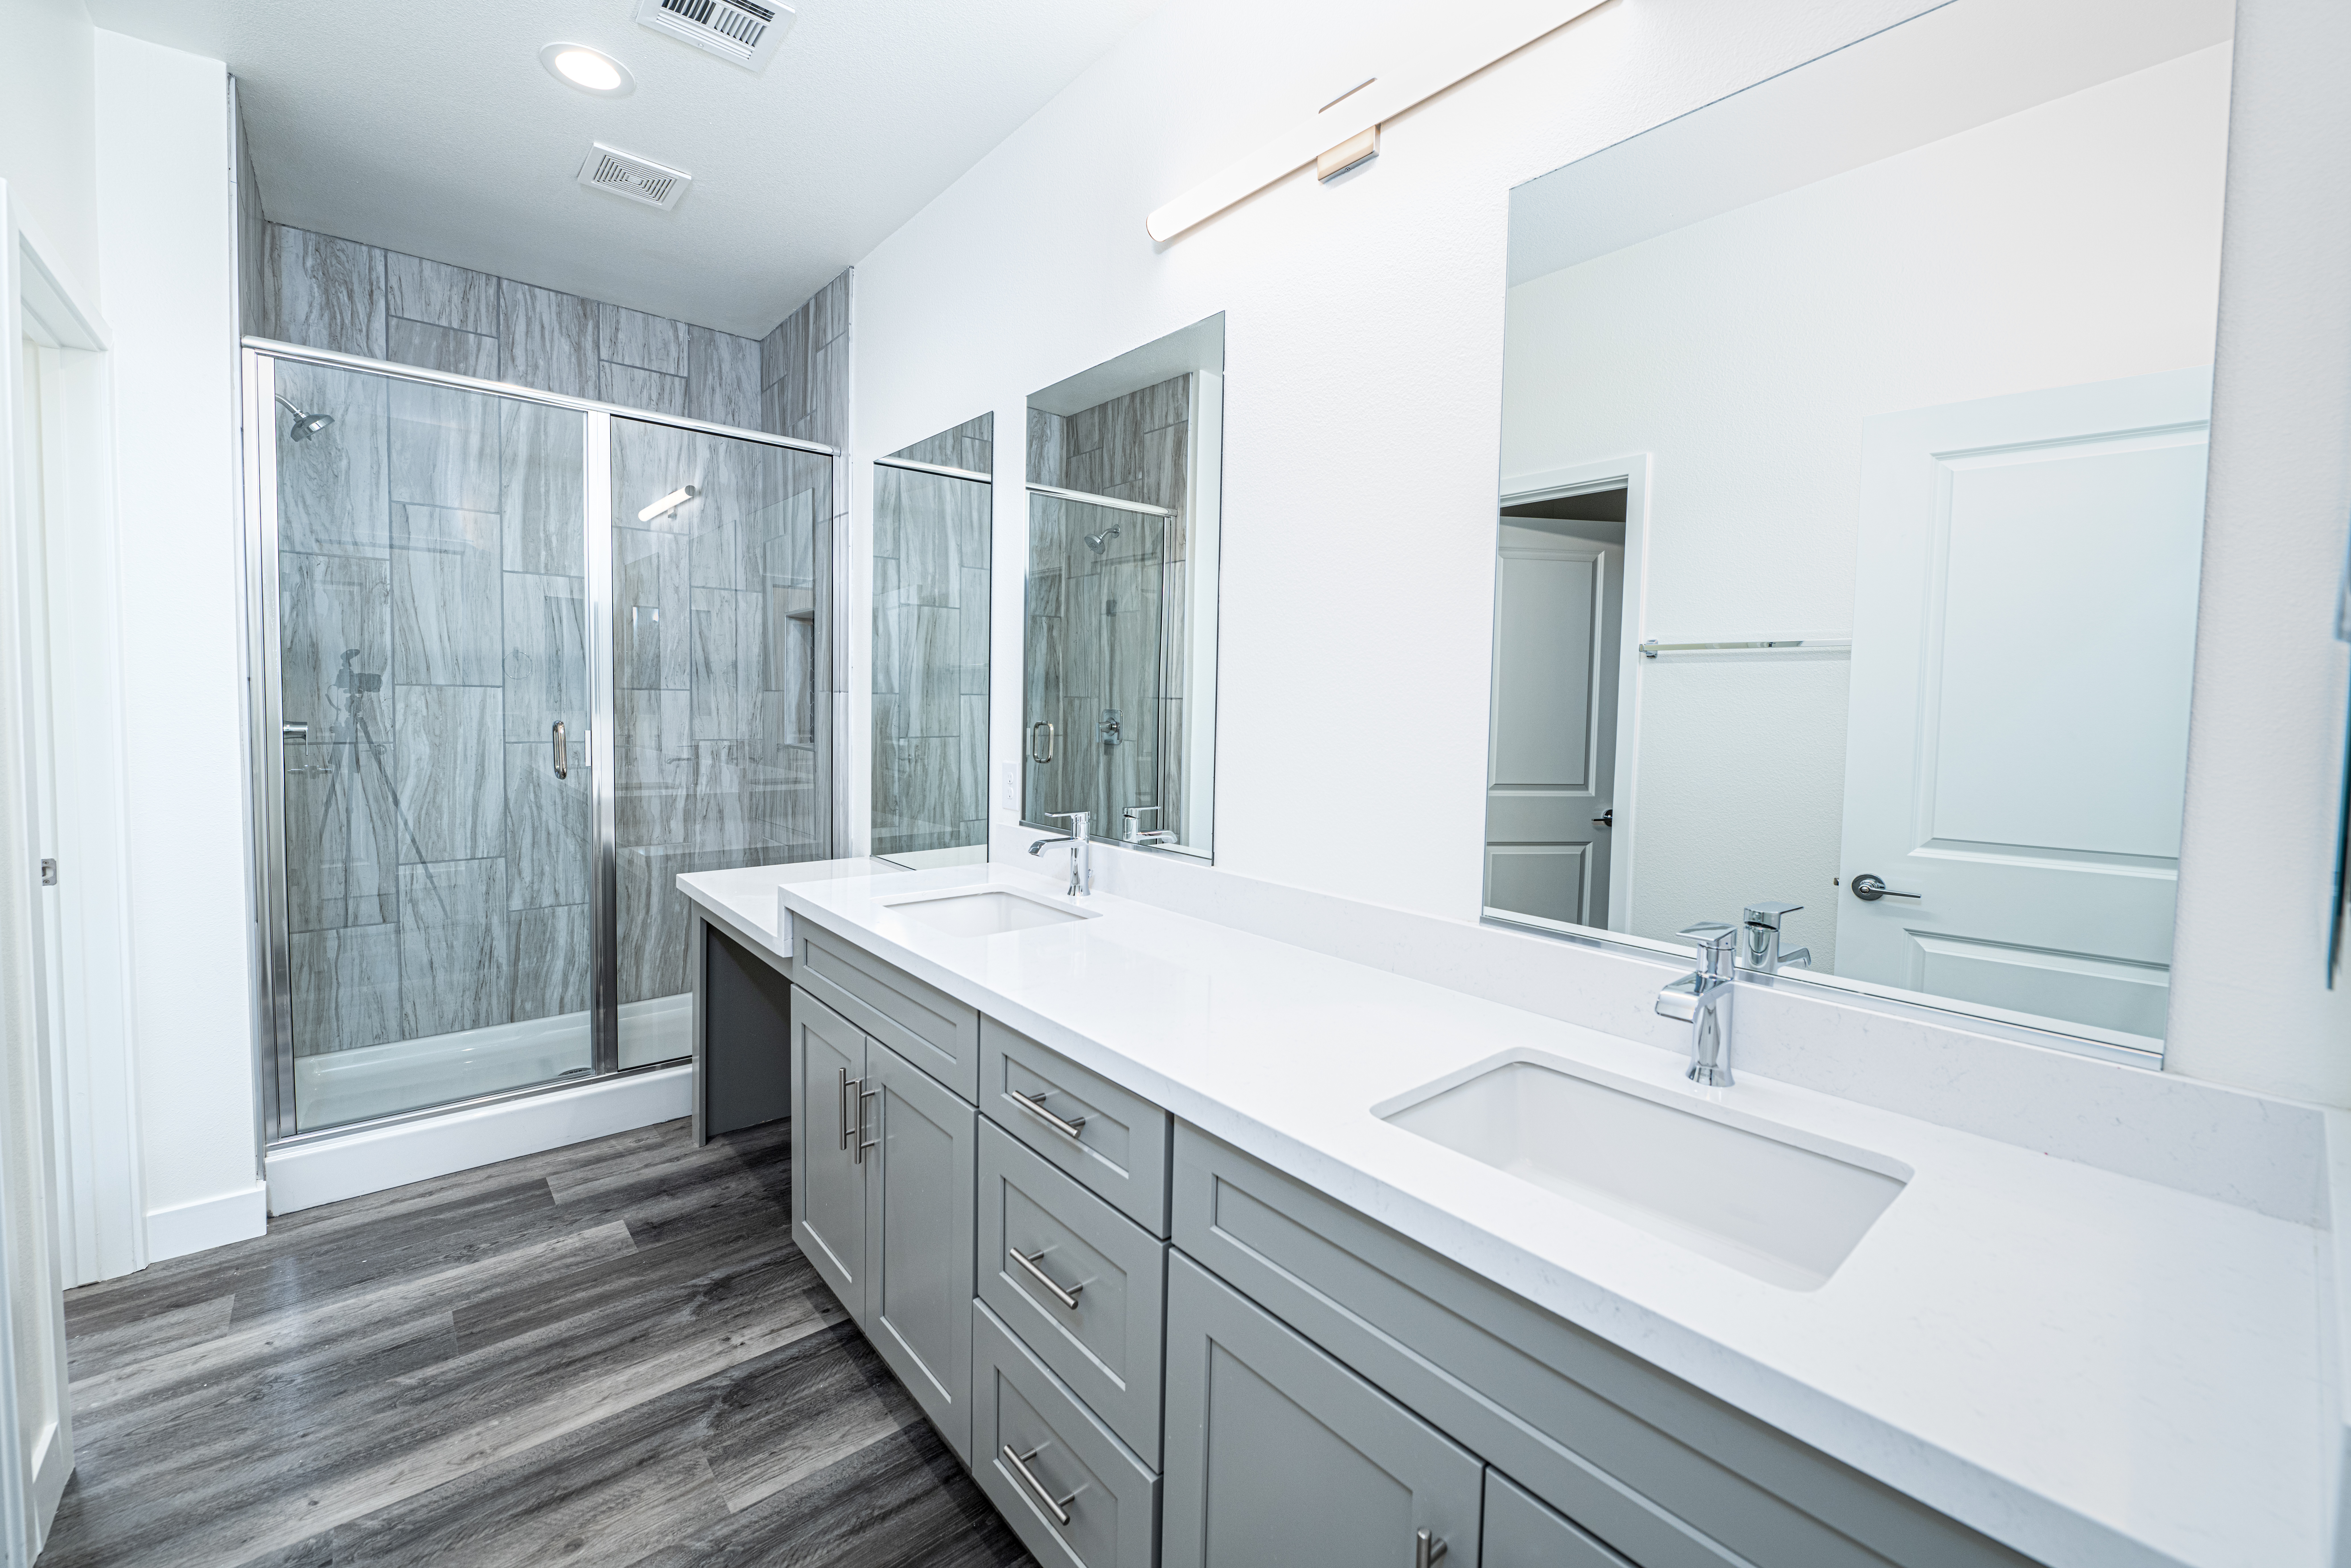 Primary Bathroom of Unit A at Thrive by Edward Homes